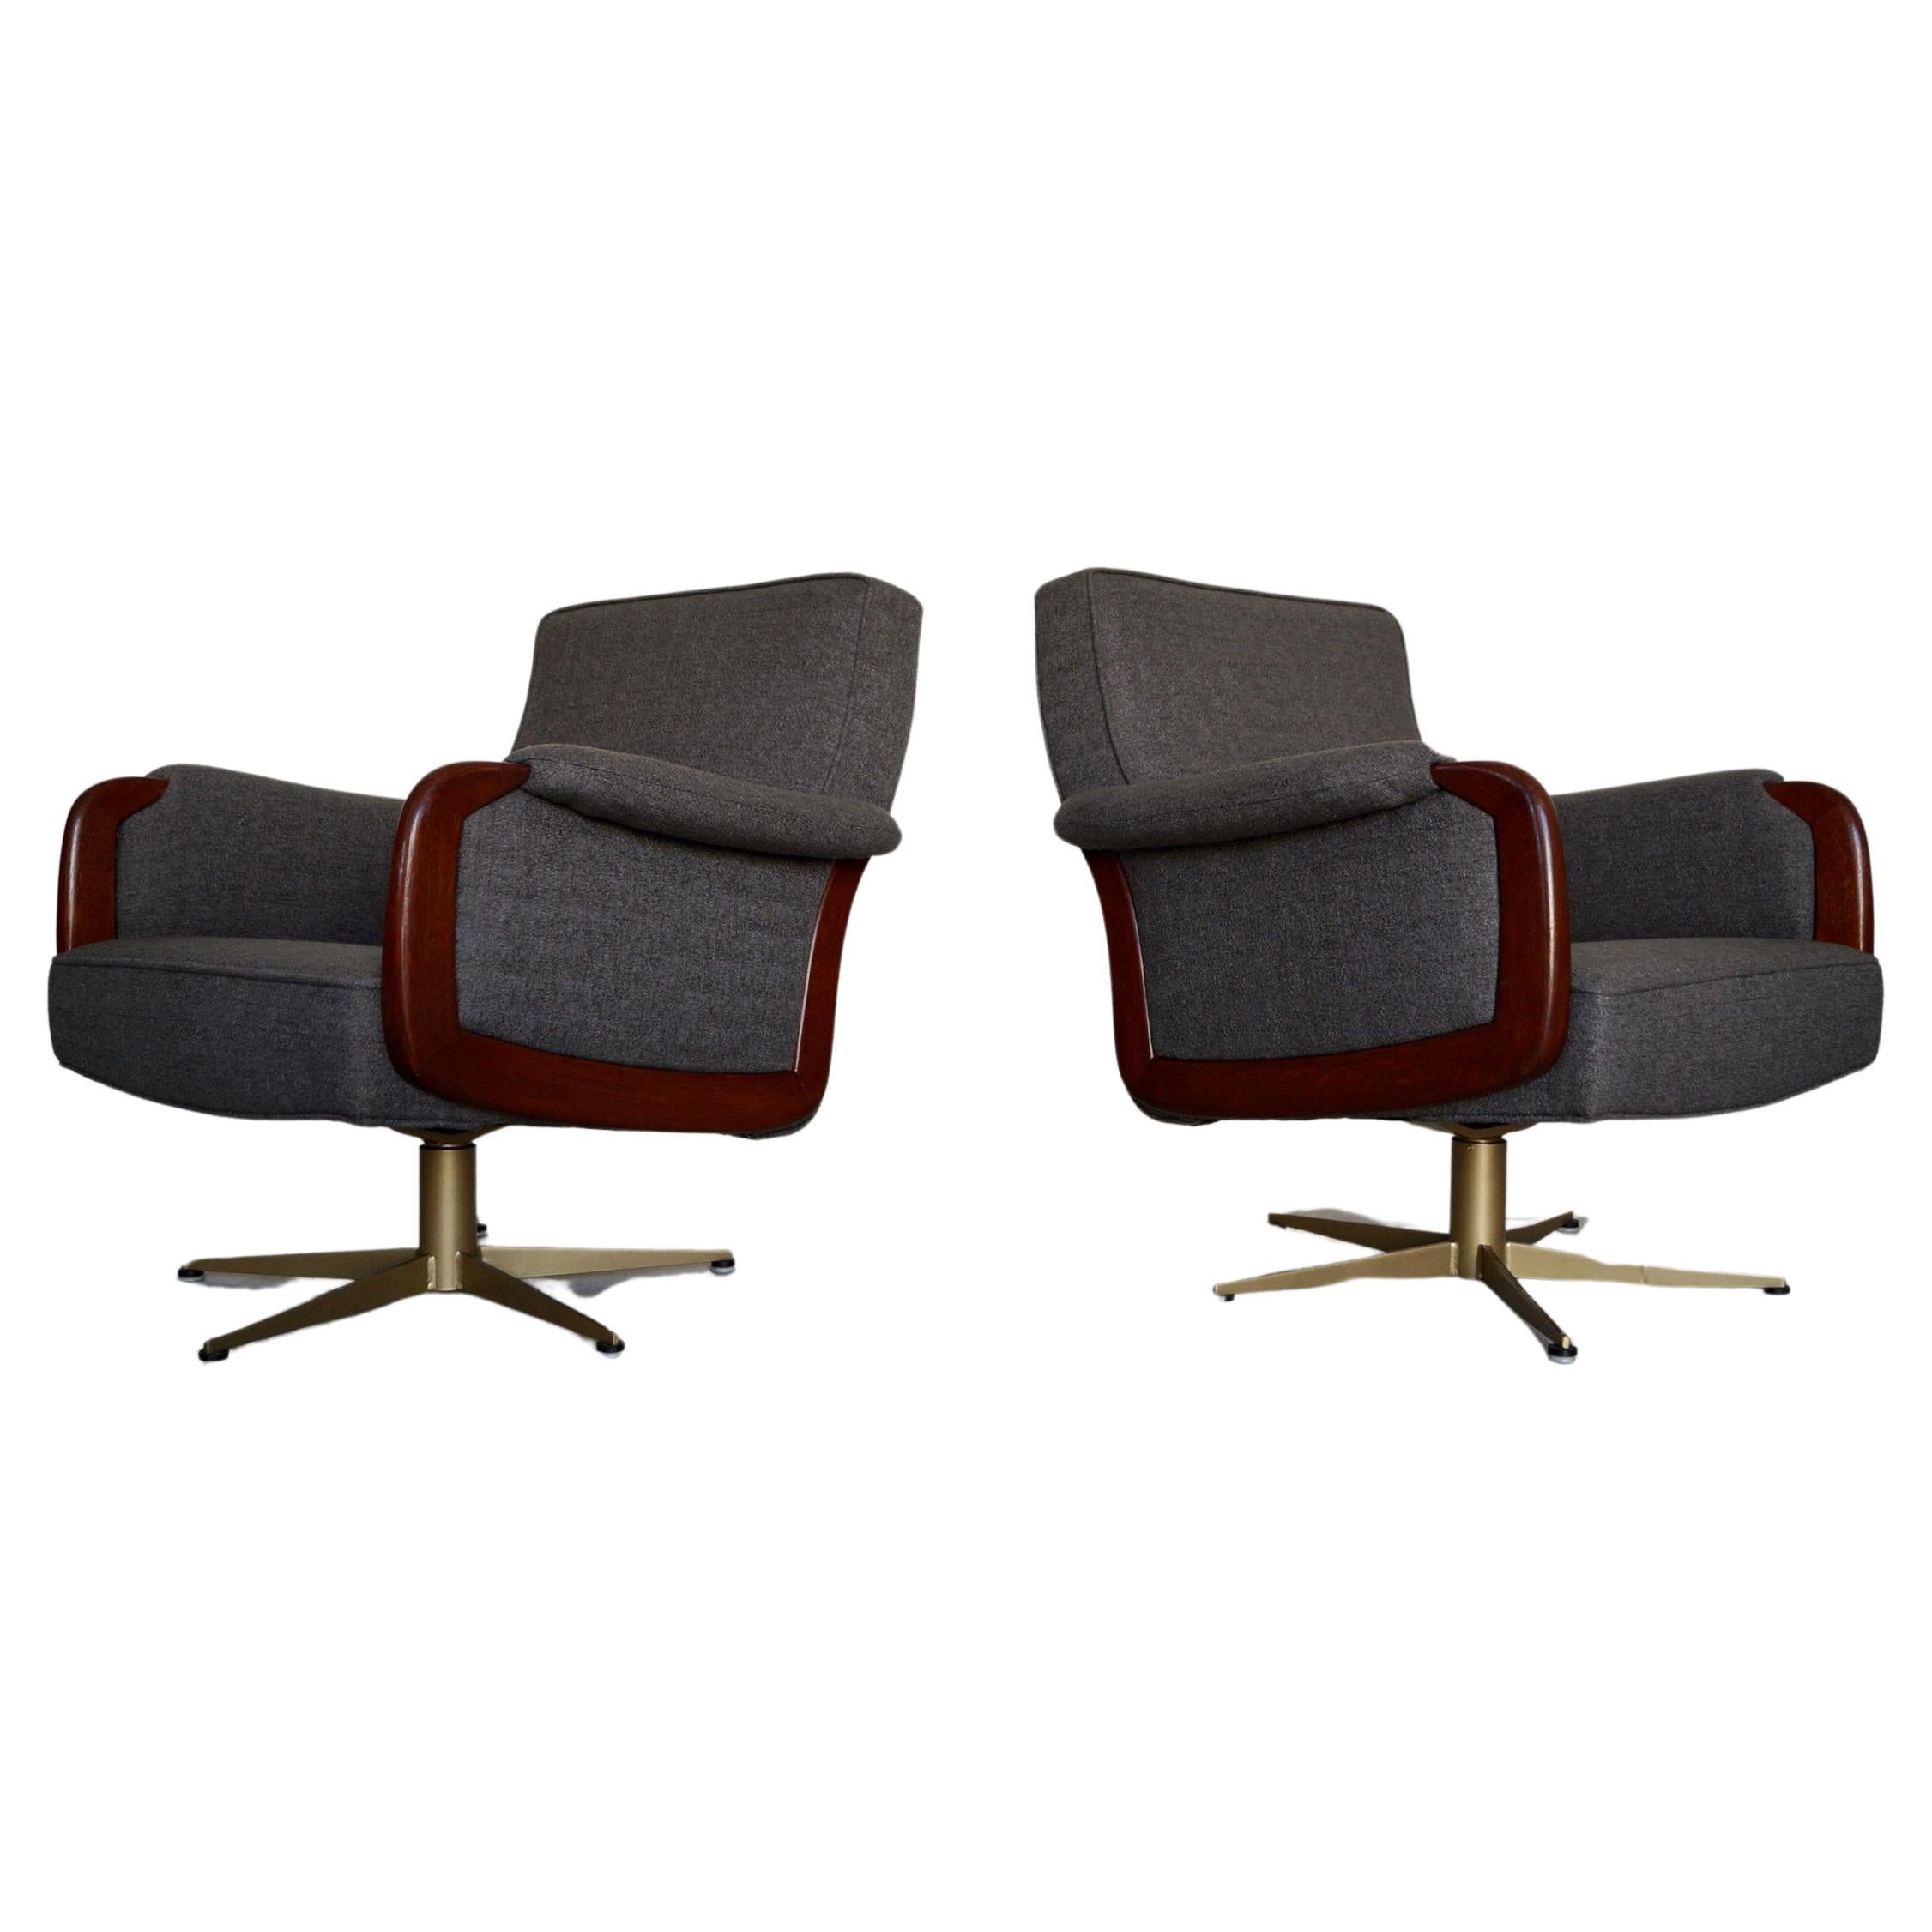 1970's Mid-Century Modern Swivel Lounge Chairs - a Pair For Sale